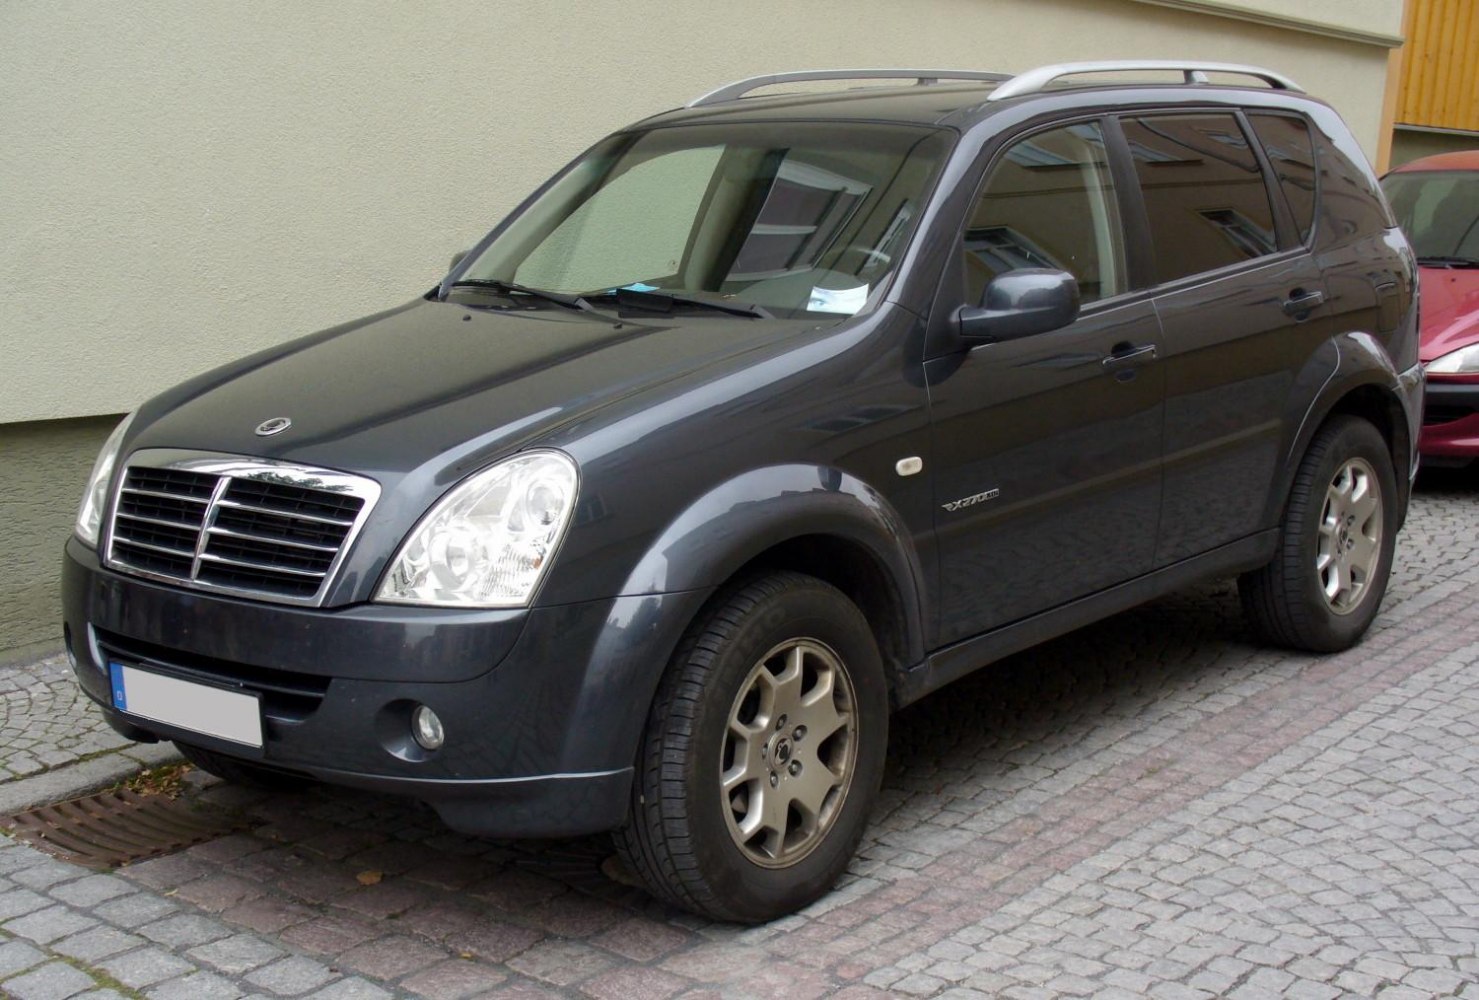 https://totalrenting.es/wp-content/uploads/2022/10/ssangyong-rexton-i-facelift-2006-2006-rx-270-xdi-automatic-163-cv-suv.png